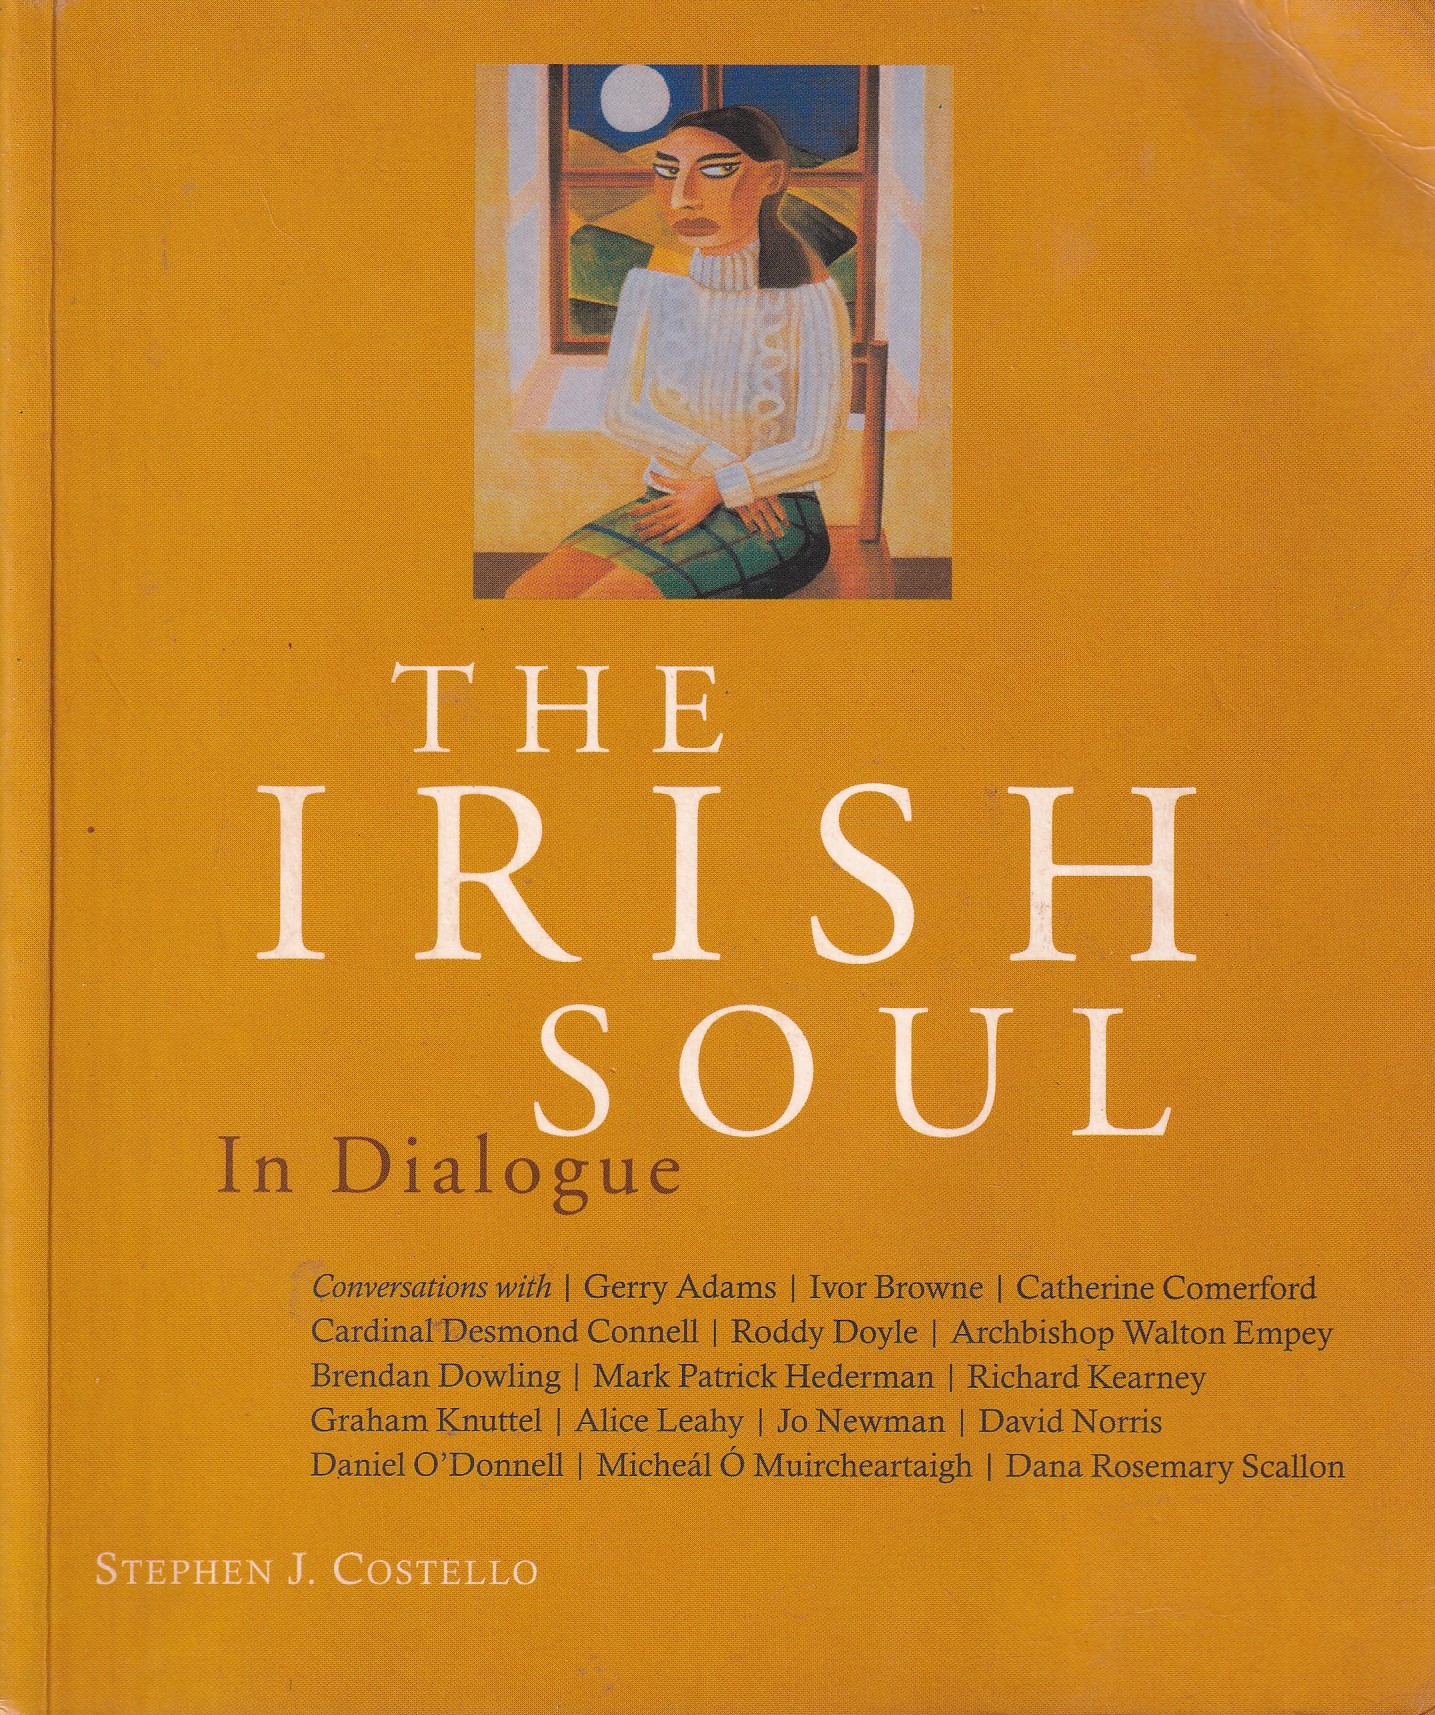 The Irish Soul: In Dialogue by Stephen Costello (ed.)